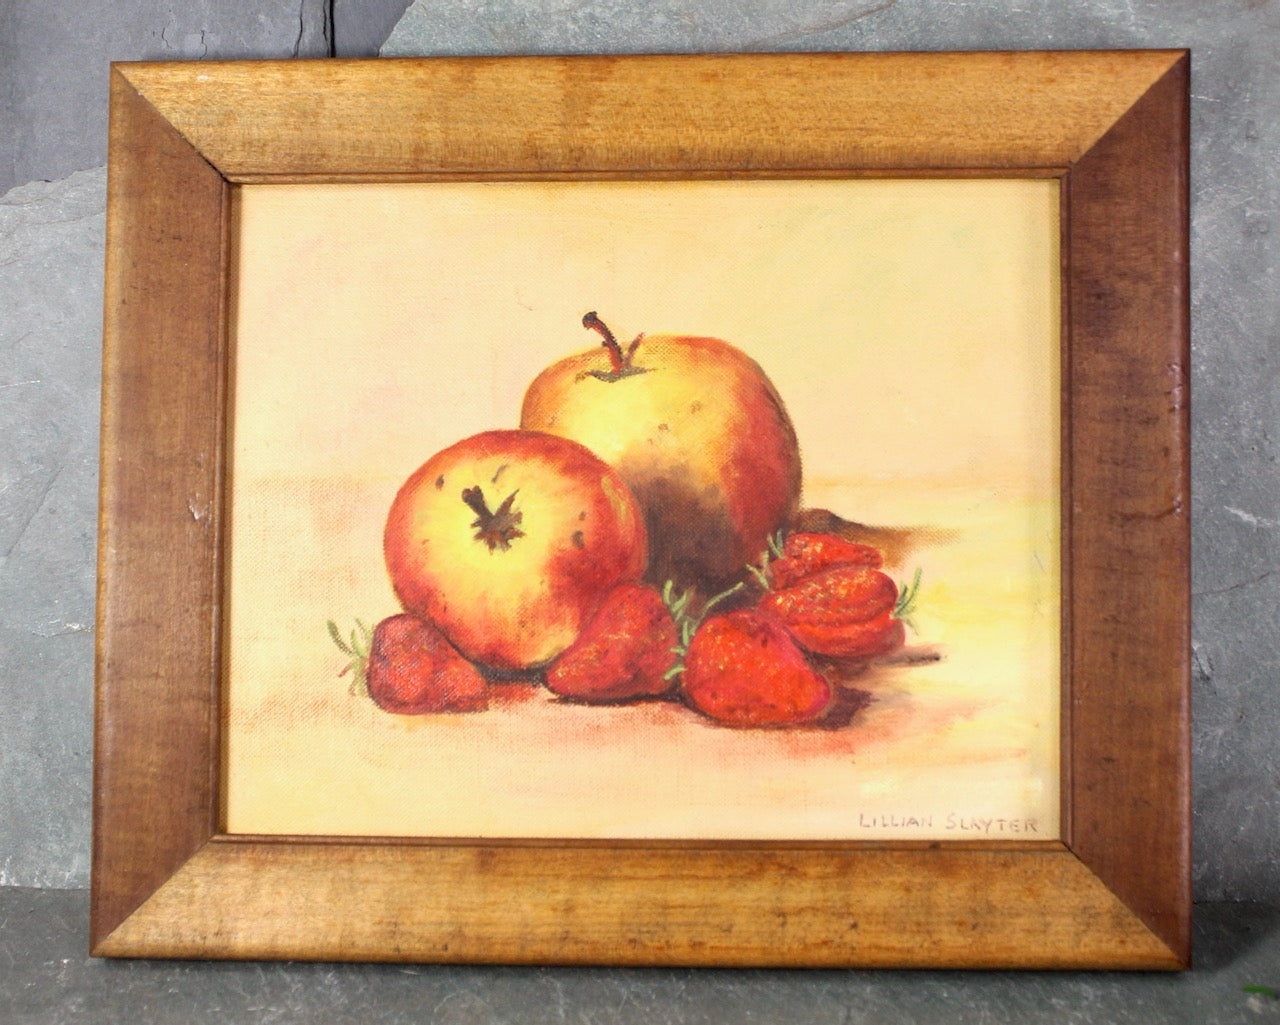 Original, Signed Oil Paintings Your Choice of Apple or Tomatoes | Lillian Slayter Artist | 11.5"x10.25" Wooden Frames | Bixley Shop